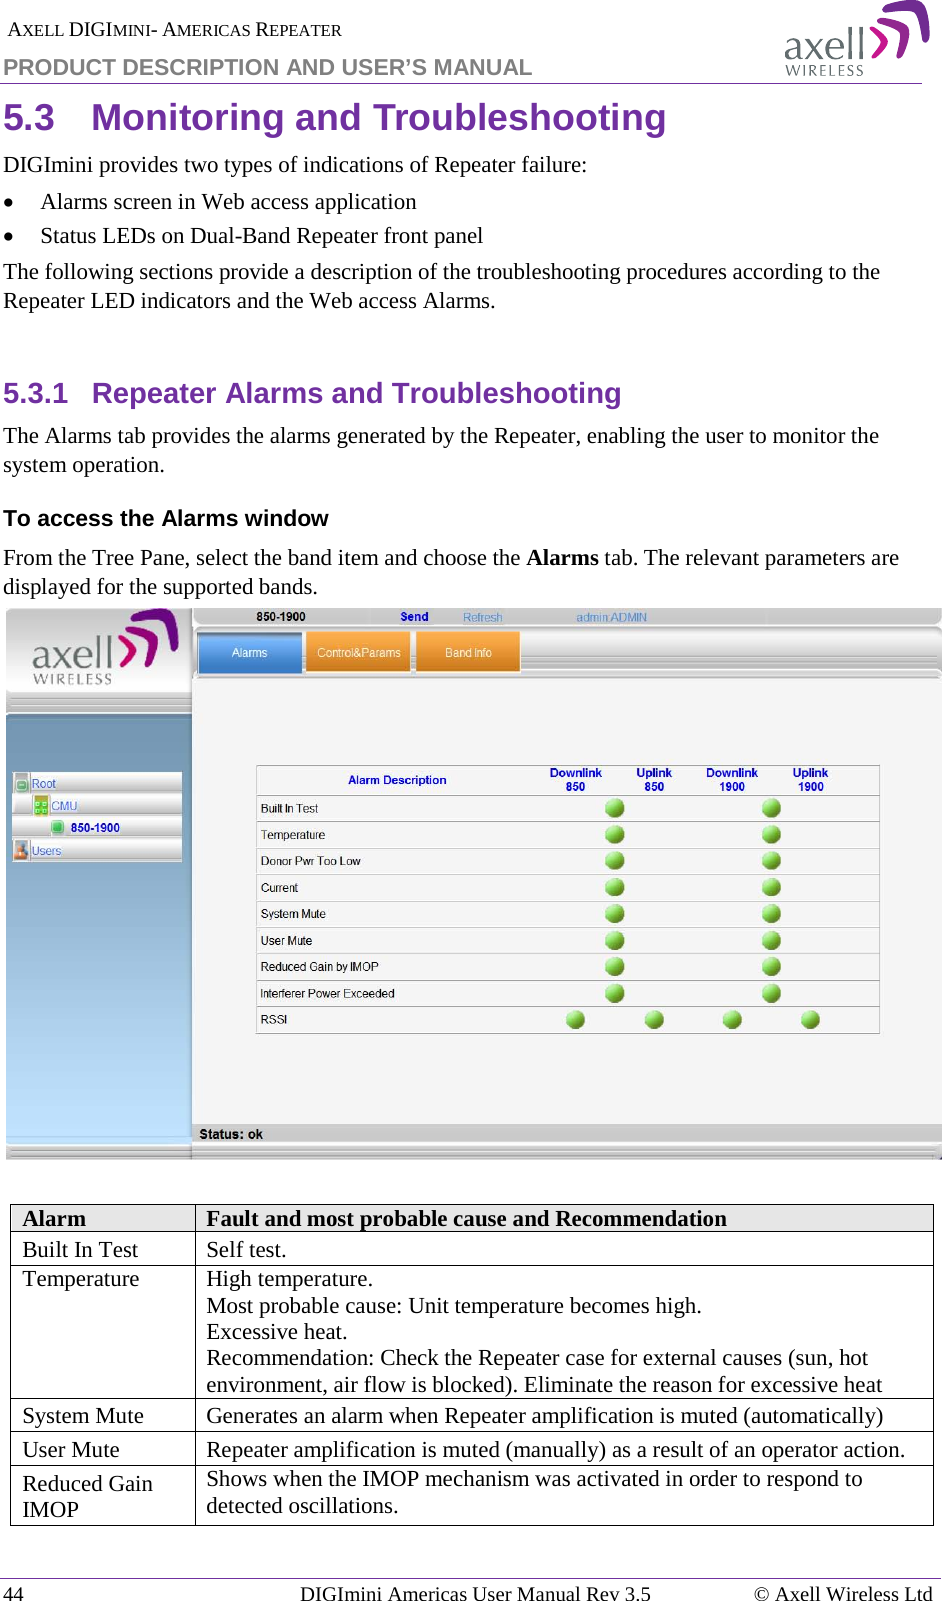  AXELL DIGIMINI- AMERICAS REPEATER PRODUCT DESCRIPTION AND USER’S MANUAL 44   DIGImini Americas User Manual Rev 3.5  © Axell Wireless Ltd 5.3  Monitoring and Troubleshooting DIGImini provides two types of indications of Repeater failure:  • Alarms screen in Web access application  • Status LEDs on Dual-Band Repeater front panel The following sections provide a description of the troubleshooting procedures according to the Repeater LED indicators and the Web access Alarms.  5.3.1  Repeater Alarms and Troubleshooting The Alarms tab provides the alarms generated by the Repeater, enabling the user to monitor the system operation. To access the Alarms window From the Tree Pane, select the band item and choose the Alarms tab. The relevant parameters are displayed for the supported bands.   Alarm Fault and most probable cause and Recommendation Built In Test  Self test. Temperature High temperature. Most probable cause: Unit temperature becomes high.  Excessive heat. Recommendation: Check the Repeater case for external causes (sun, hot environment, air flow is blocked). Eliminate the reason for excessive heat System Mute Generates an alarm when Repeater amplification is muted (automatically) User Mute Repeater amplification is muted (manually) as a result of an operator action. Reduced Gain IMOP Shows when the IMOP mechanism was activated in order to respond to detected oscillations.  